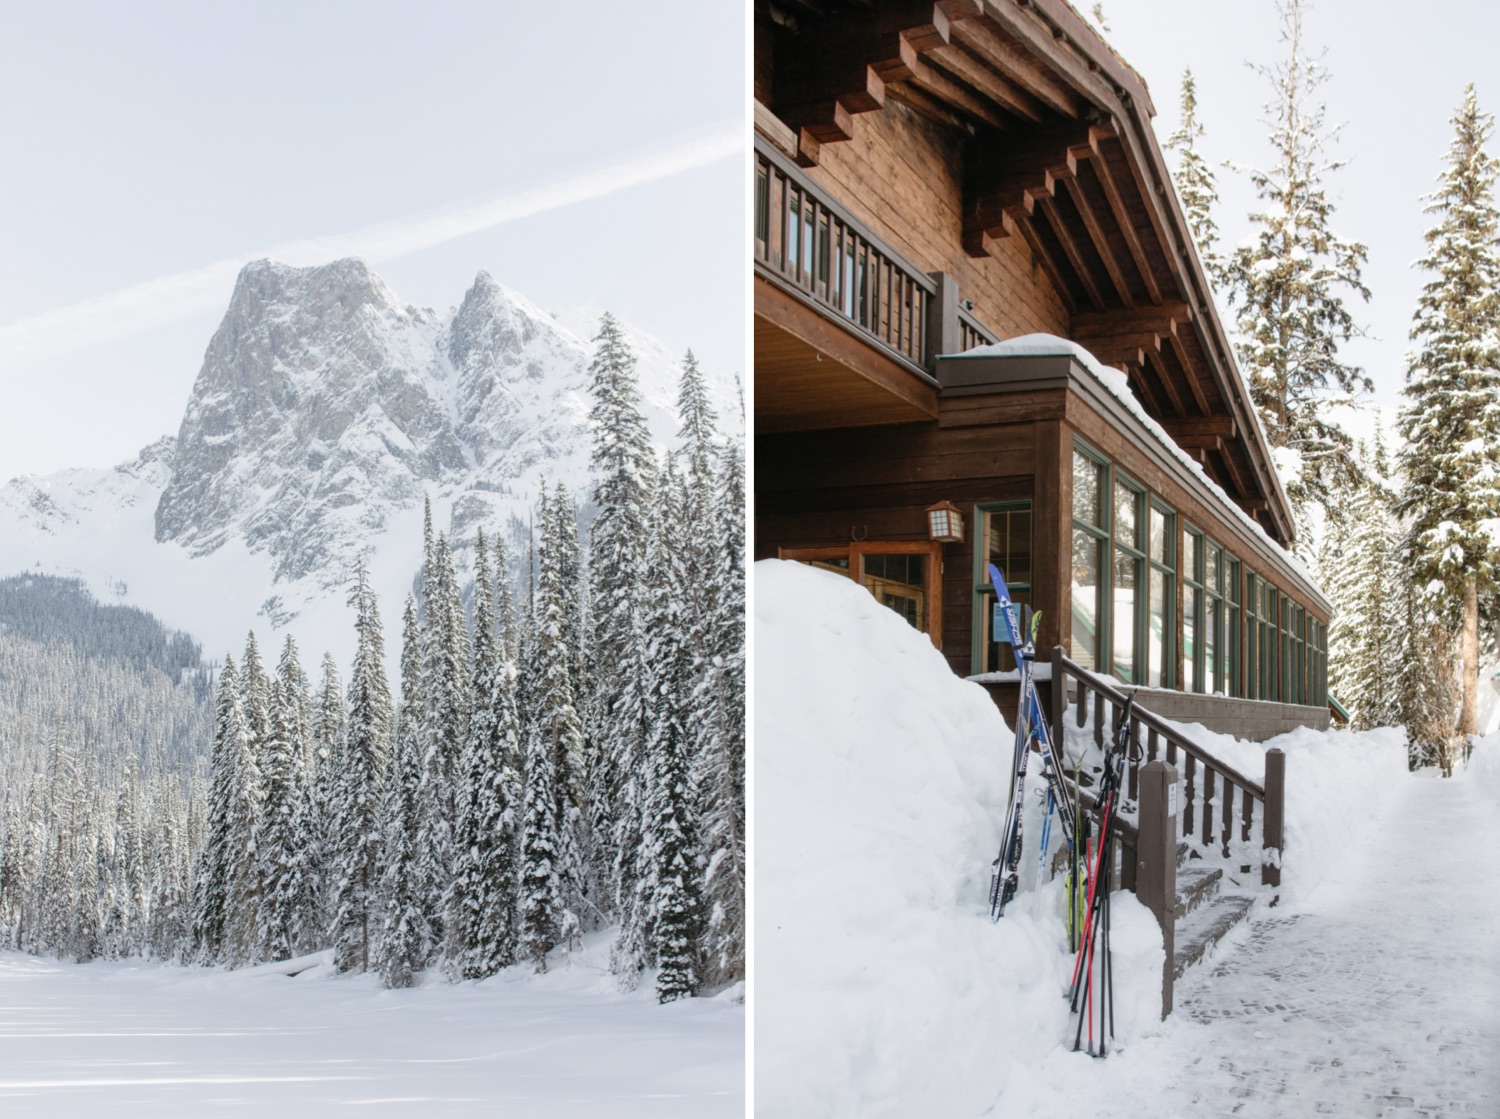 Skies stored in the snow banks in front of historic Emerald Lake Lodge in Yoho National Park